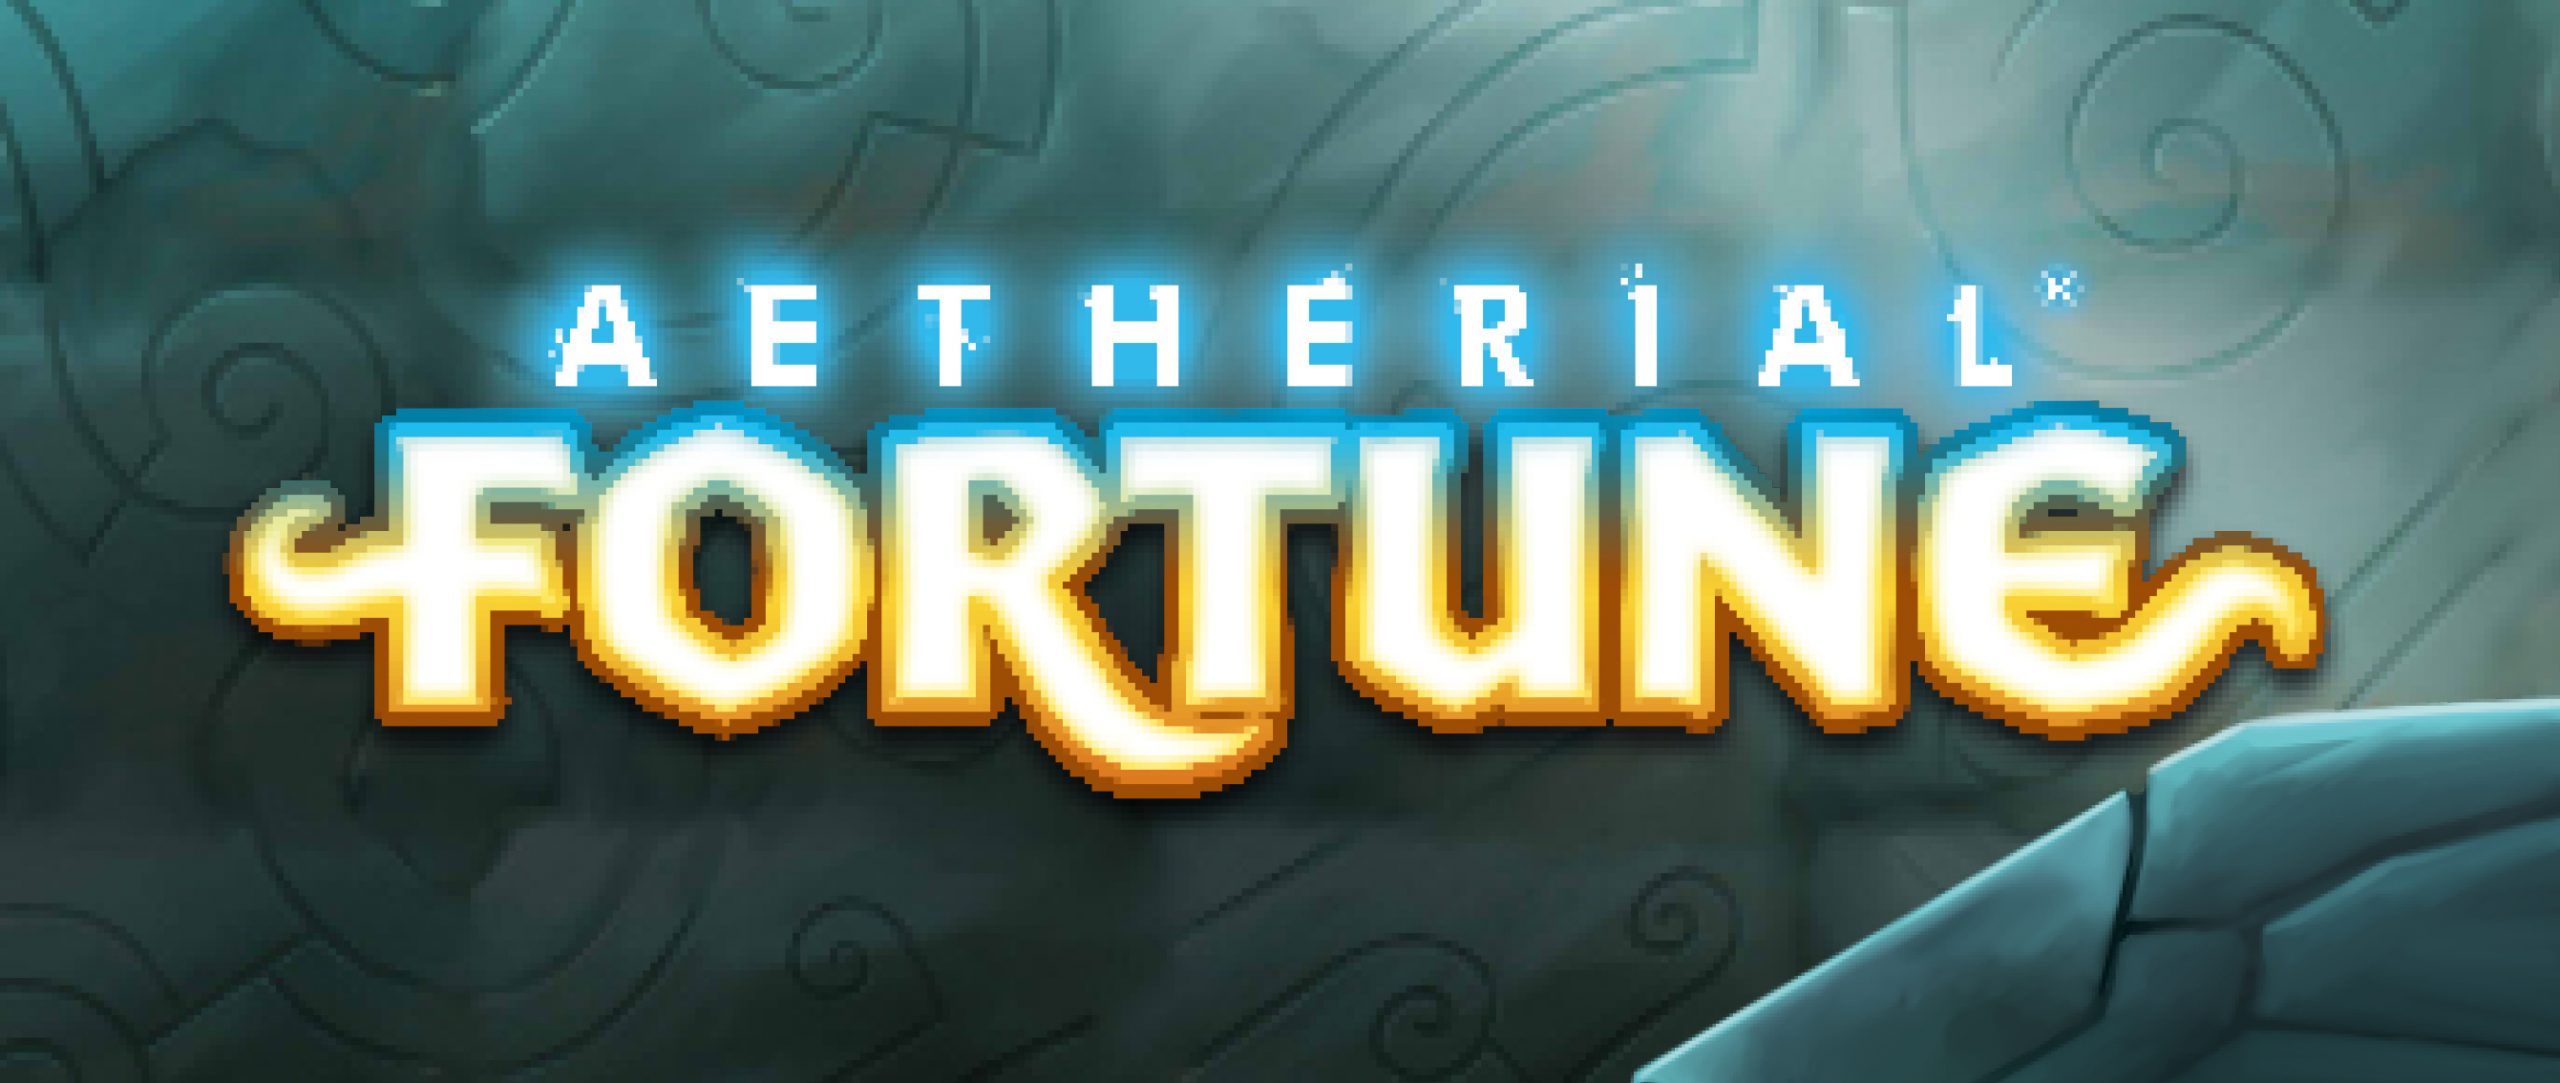 Master the wheel of elements and follow the path of Ether with Aetherial Fortune on betFIRST Casino